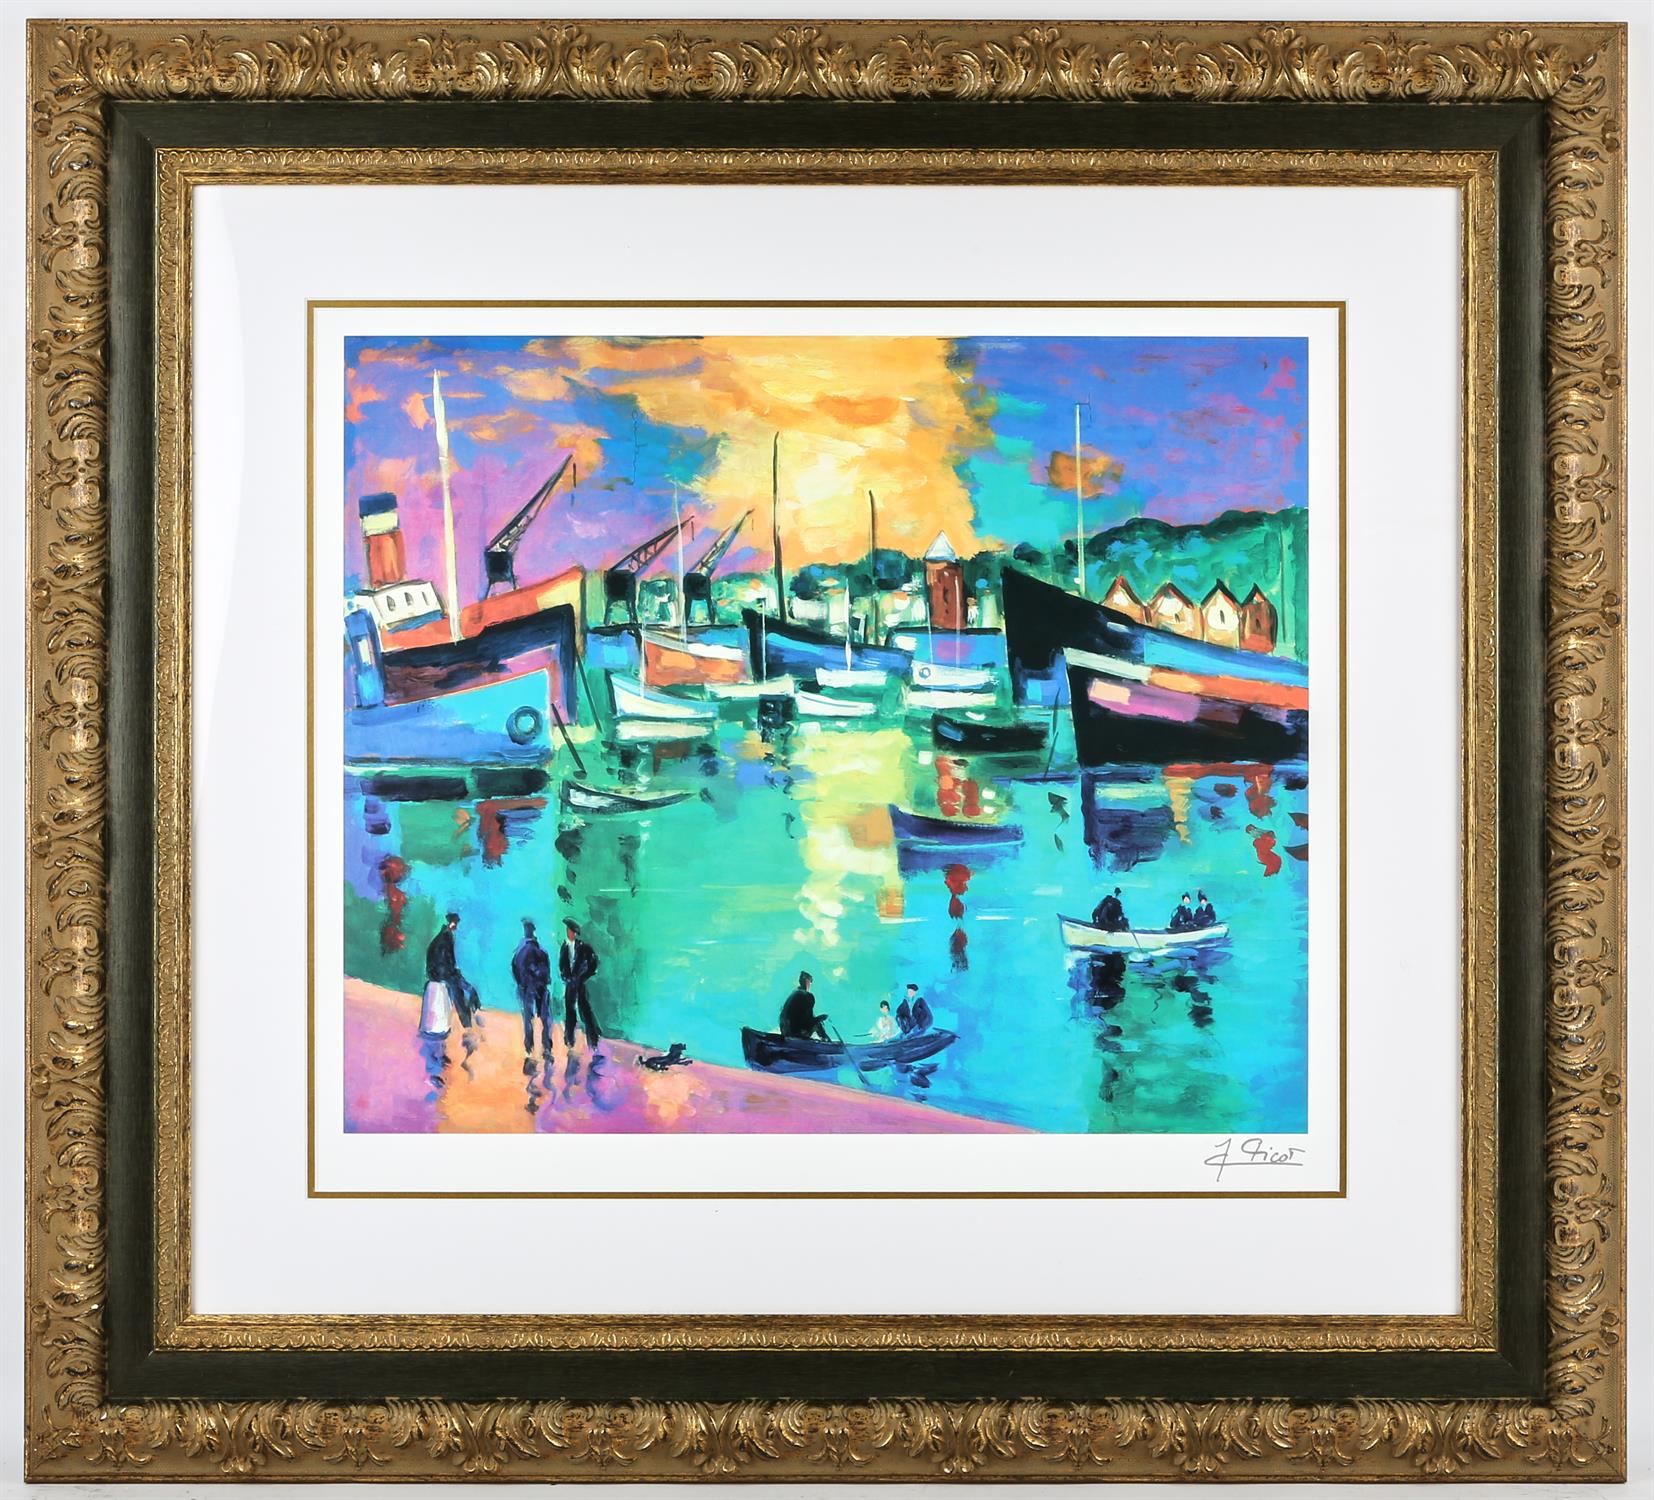 Jean-Claude Picot (French 1933-2020), Harbour scene, colour print, printed signature lower right, - Image 2 of 3